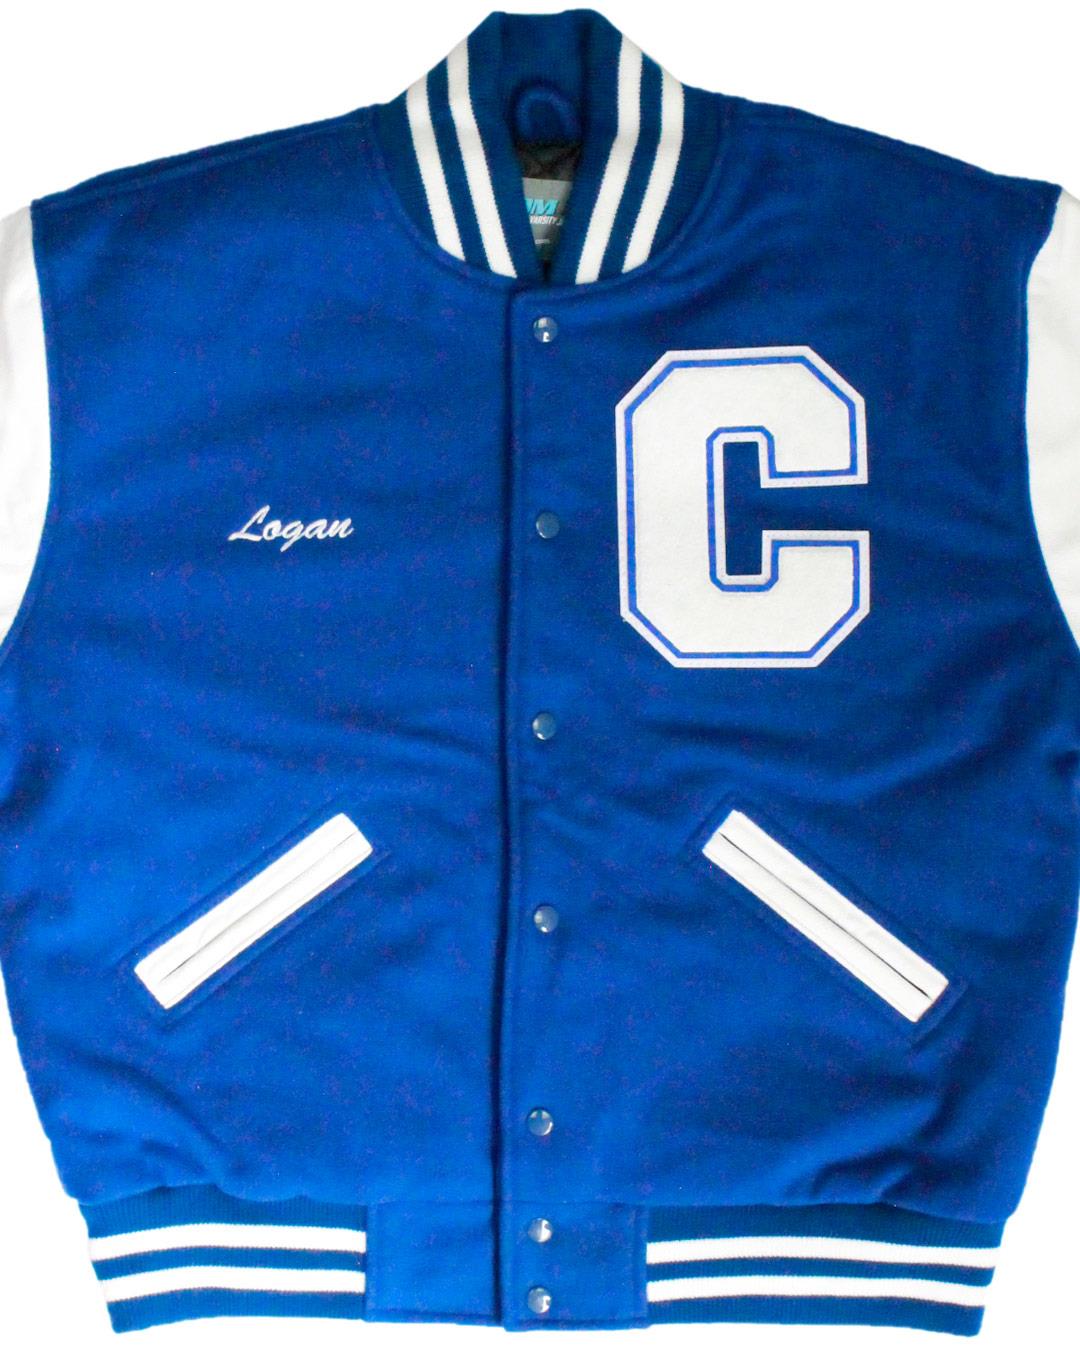 Clifton Central High School Comets Letterman Jacket, Clifton, IL - Front